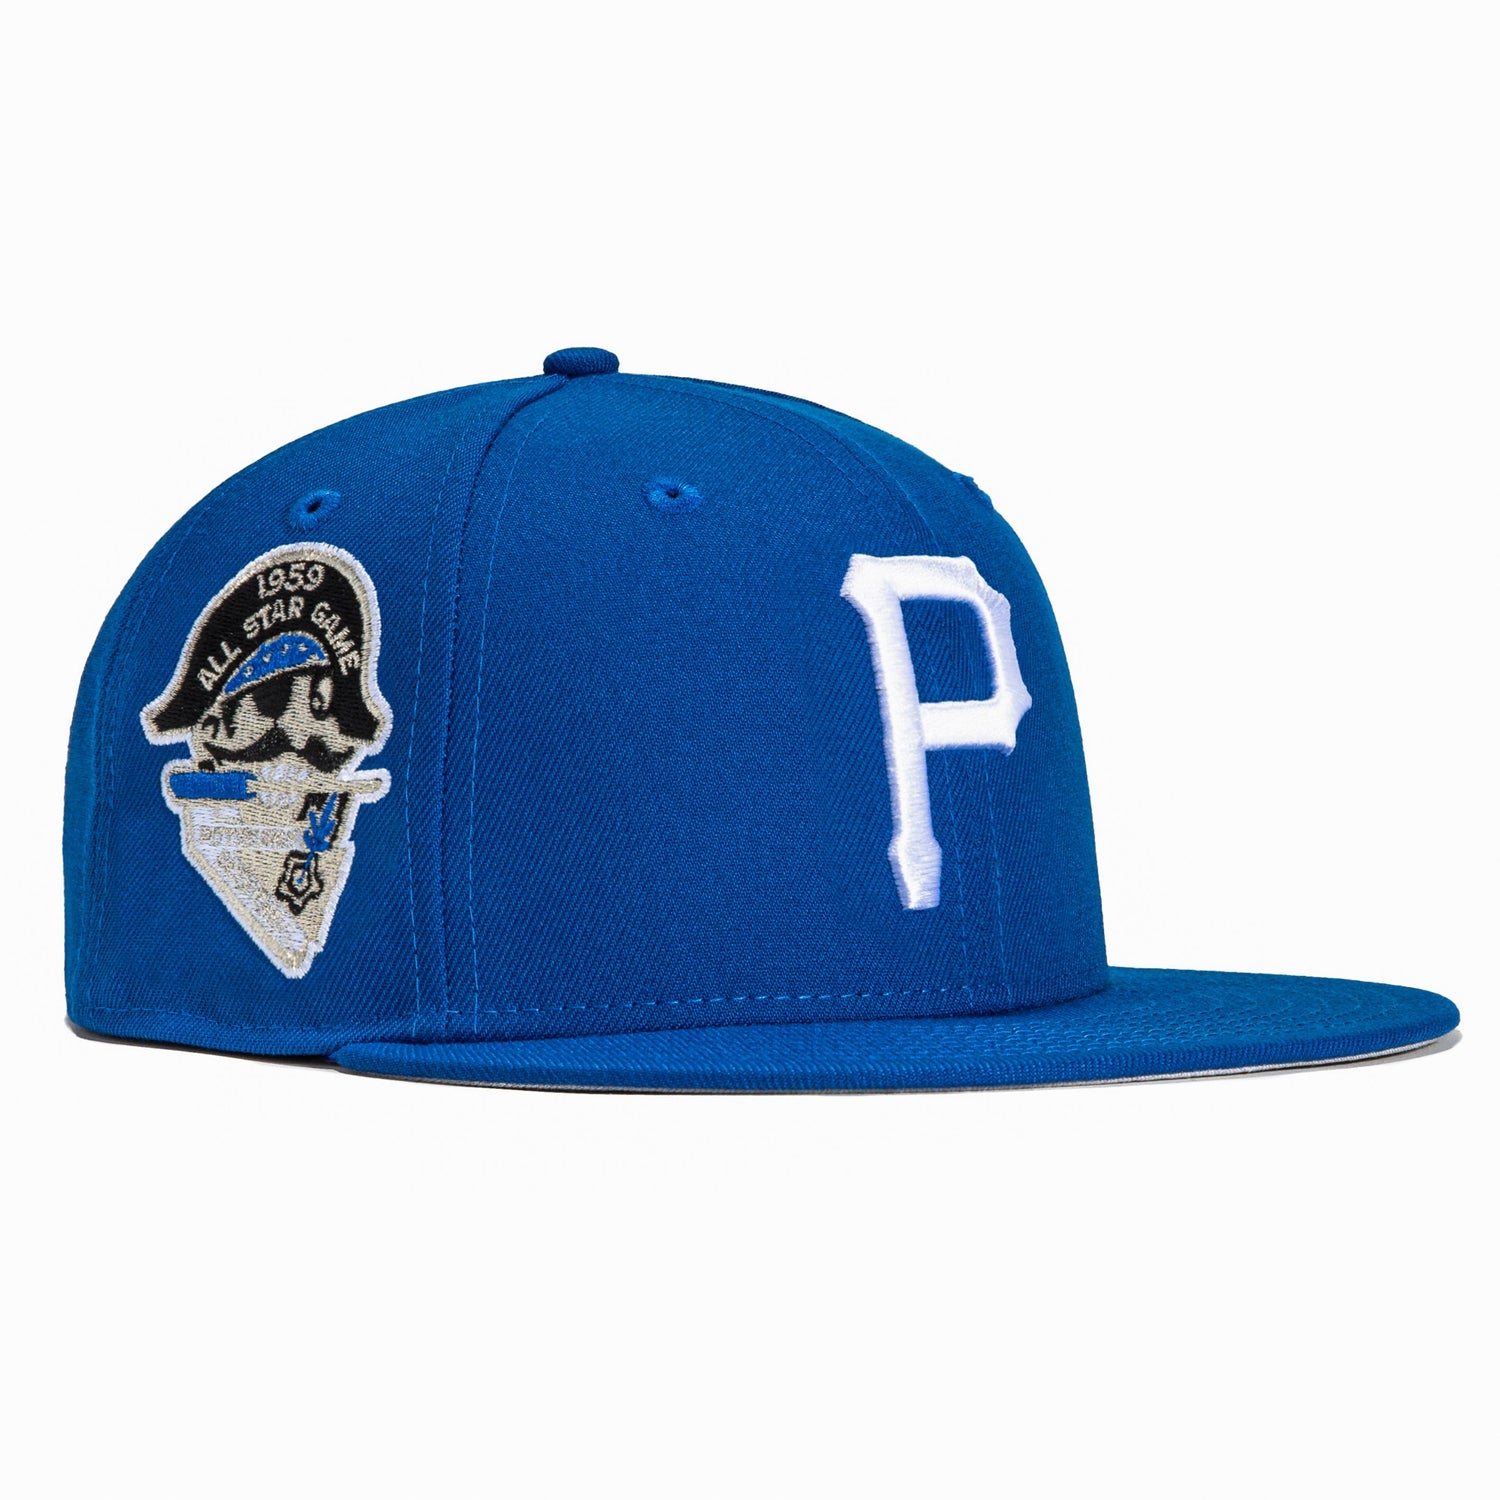 New Era 59FIFTY Pittsburgh Pirates 1959 All Star Game Patch Hat - Royal, White Royal/White / 7 3/4